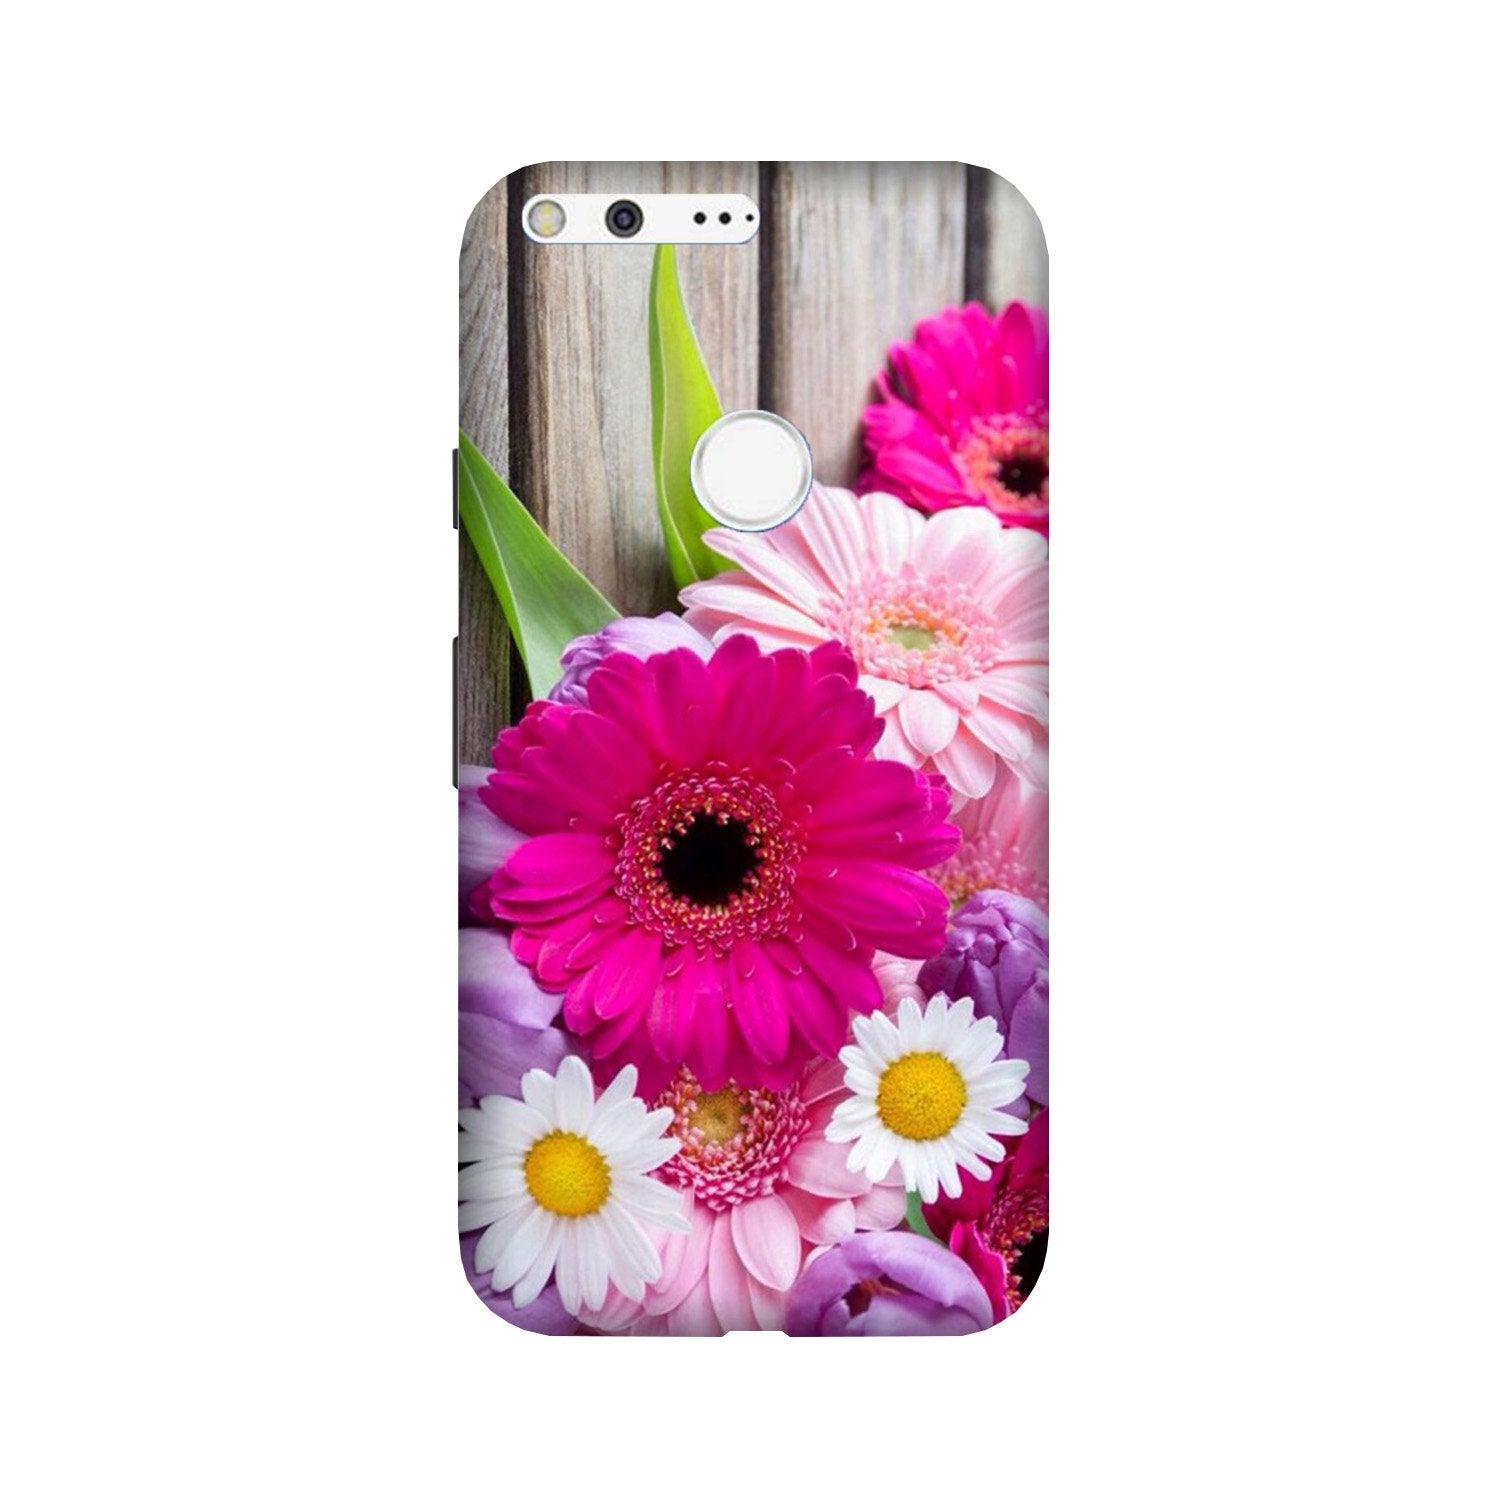 Coloful Daisy2 Case for Google Pixel XL